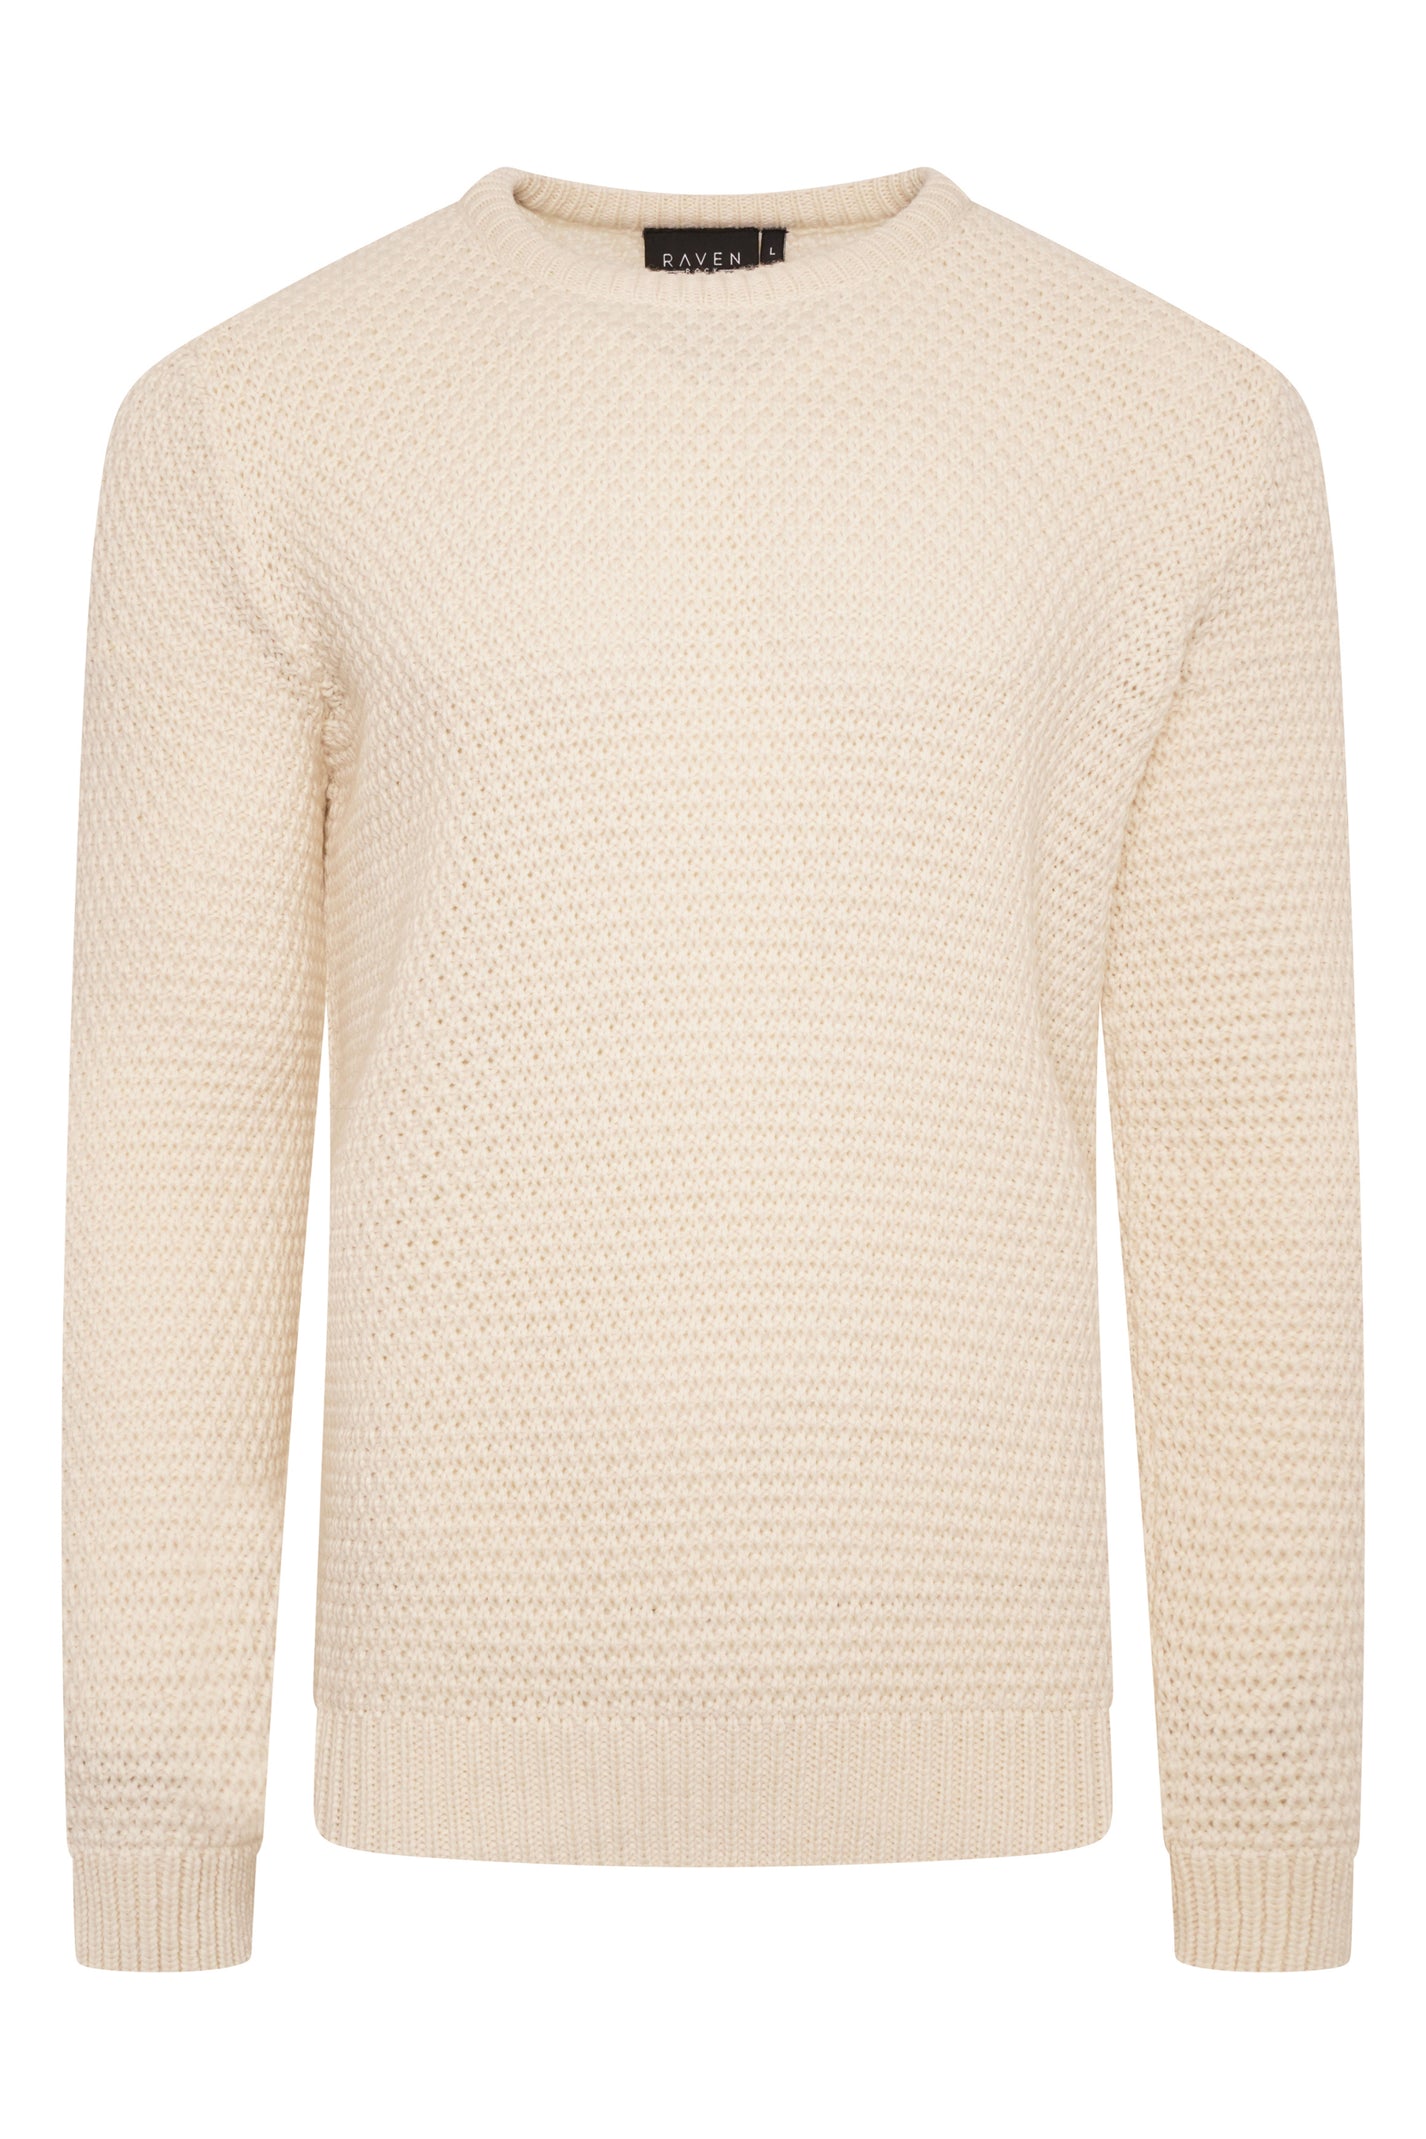 Mens Chunky Wool Jumper | Moss Stitch Jumper | Made In Britain – RAVEN ...